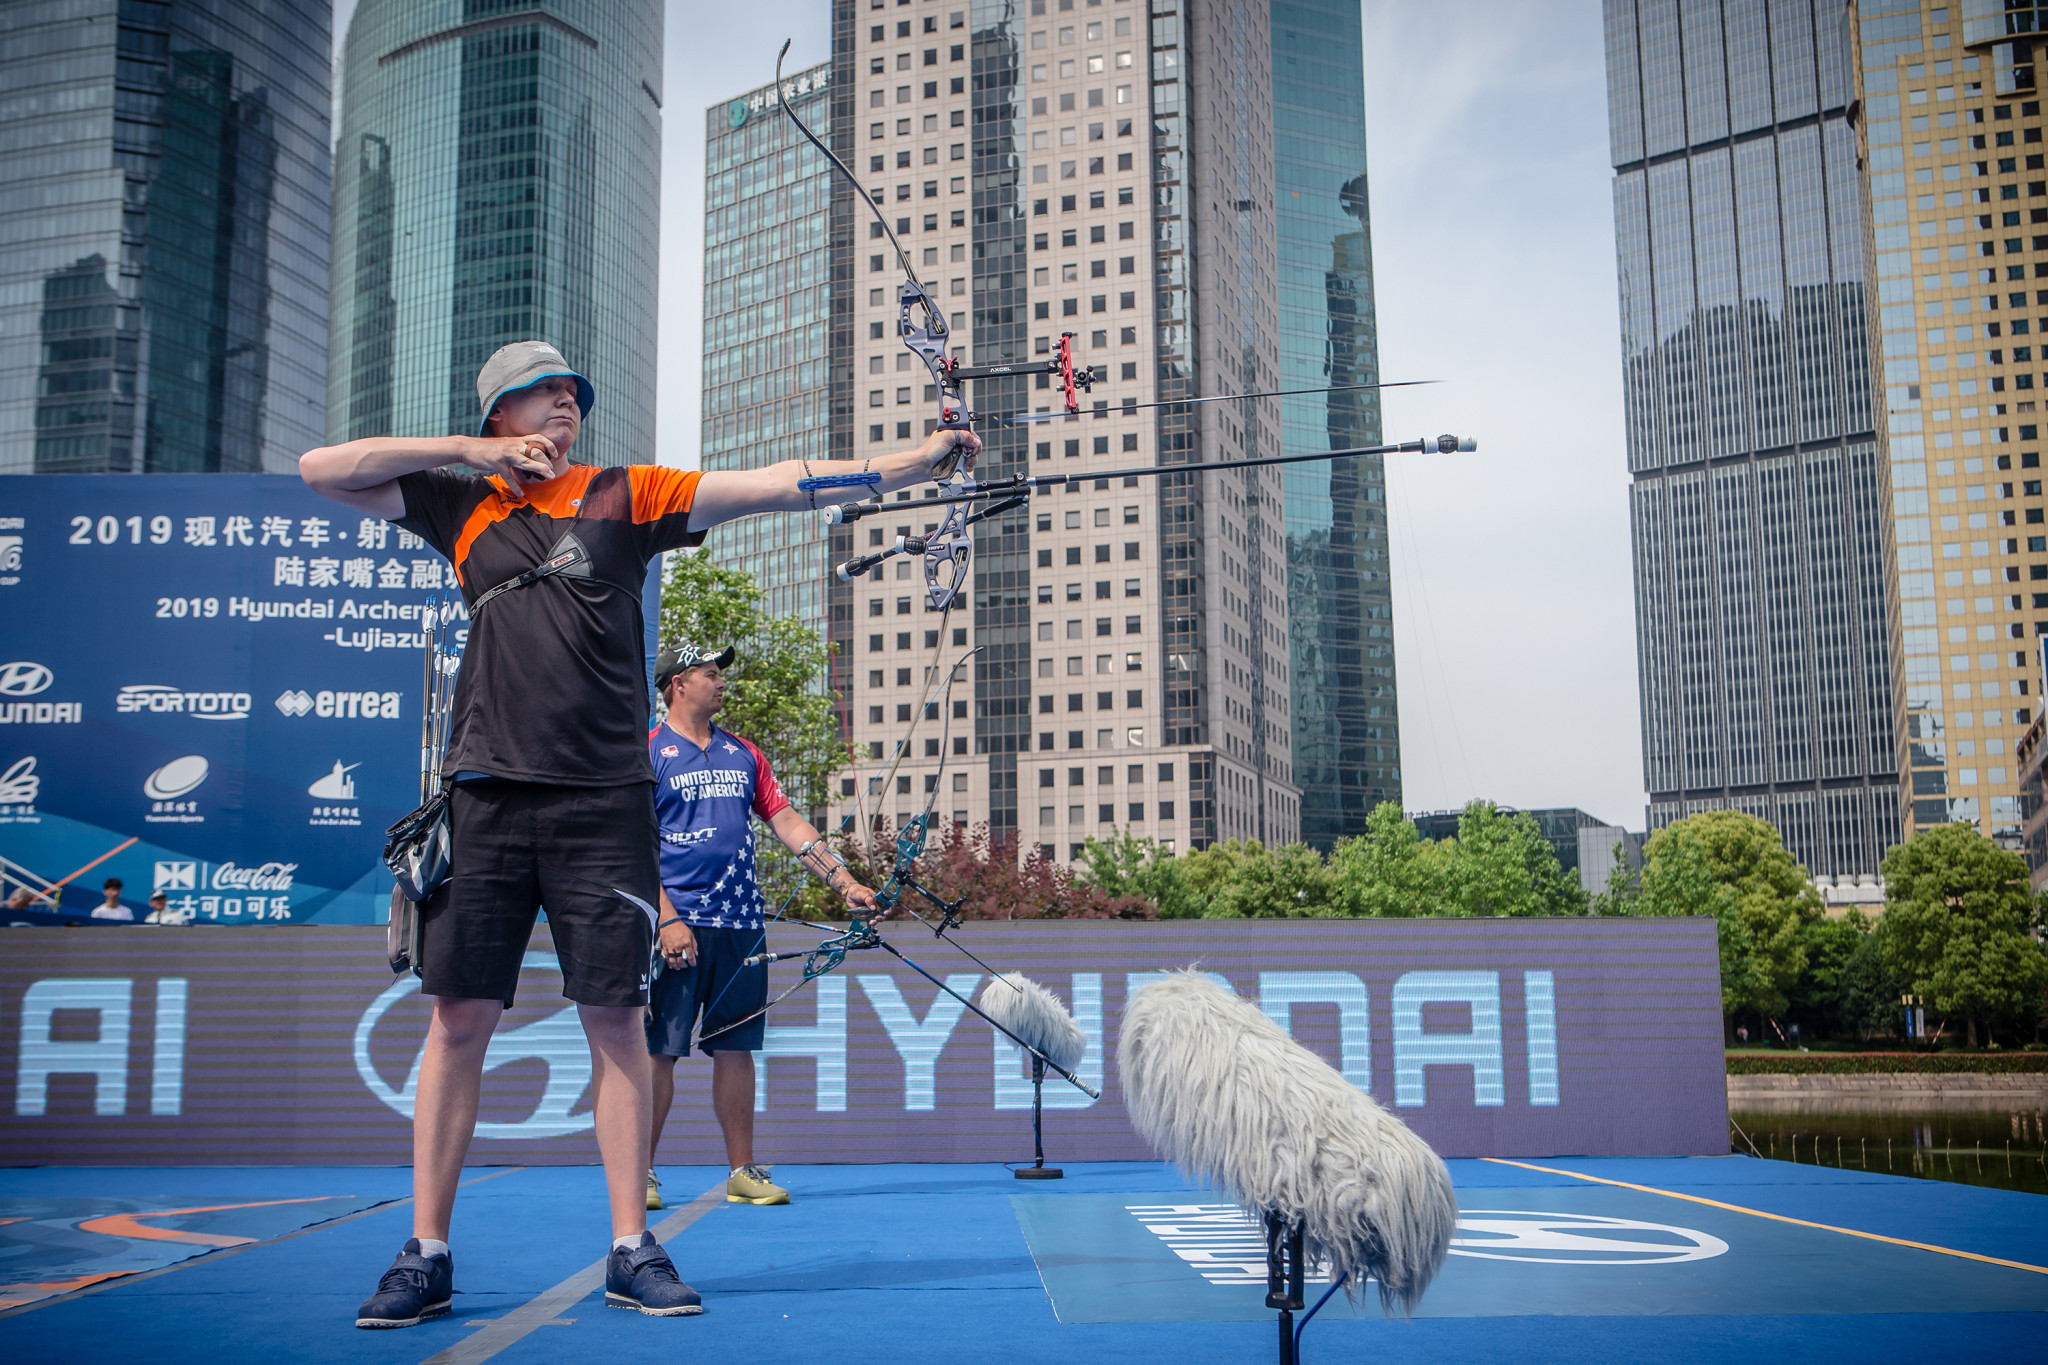 Shanghai will now host the Archery World Cup Final ©Getty Images